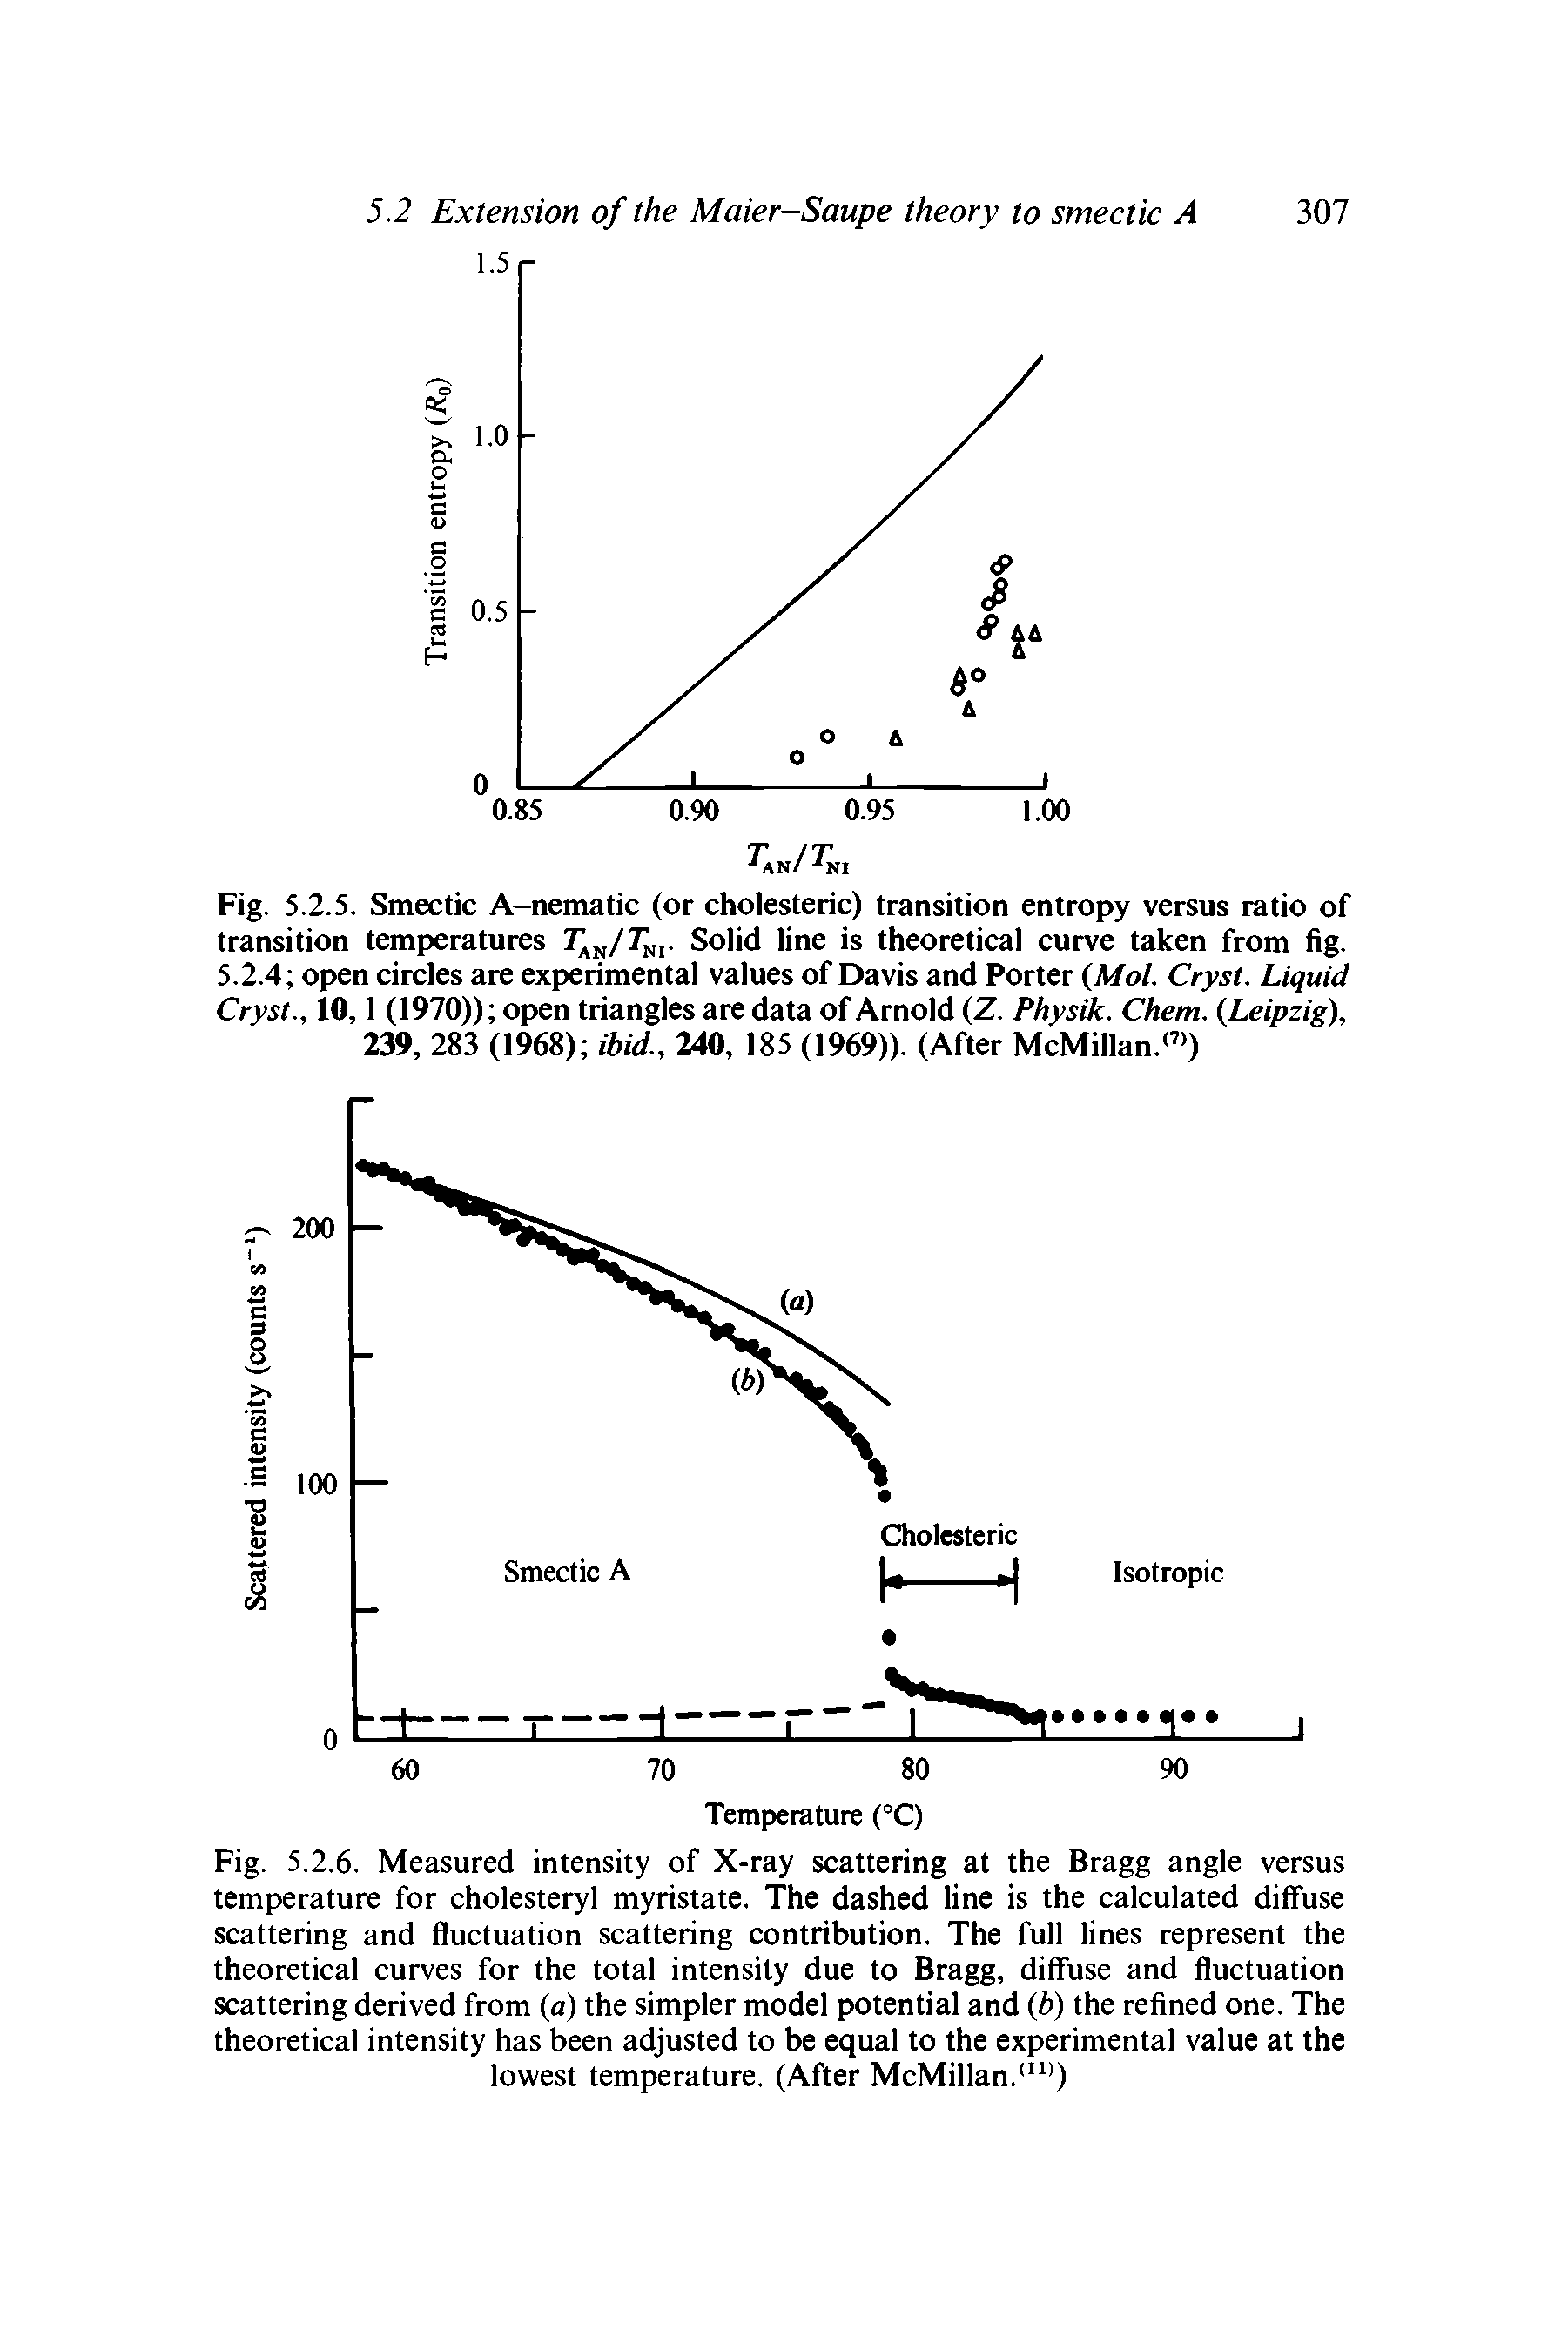 Fig. 5.2.5. Smectic A-nematic (or cholesteric) transition entropy versus ratio of transition temperatures Solid line is theoretical curve taken from fig.